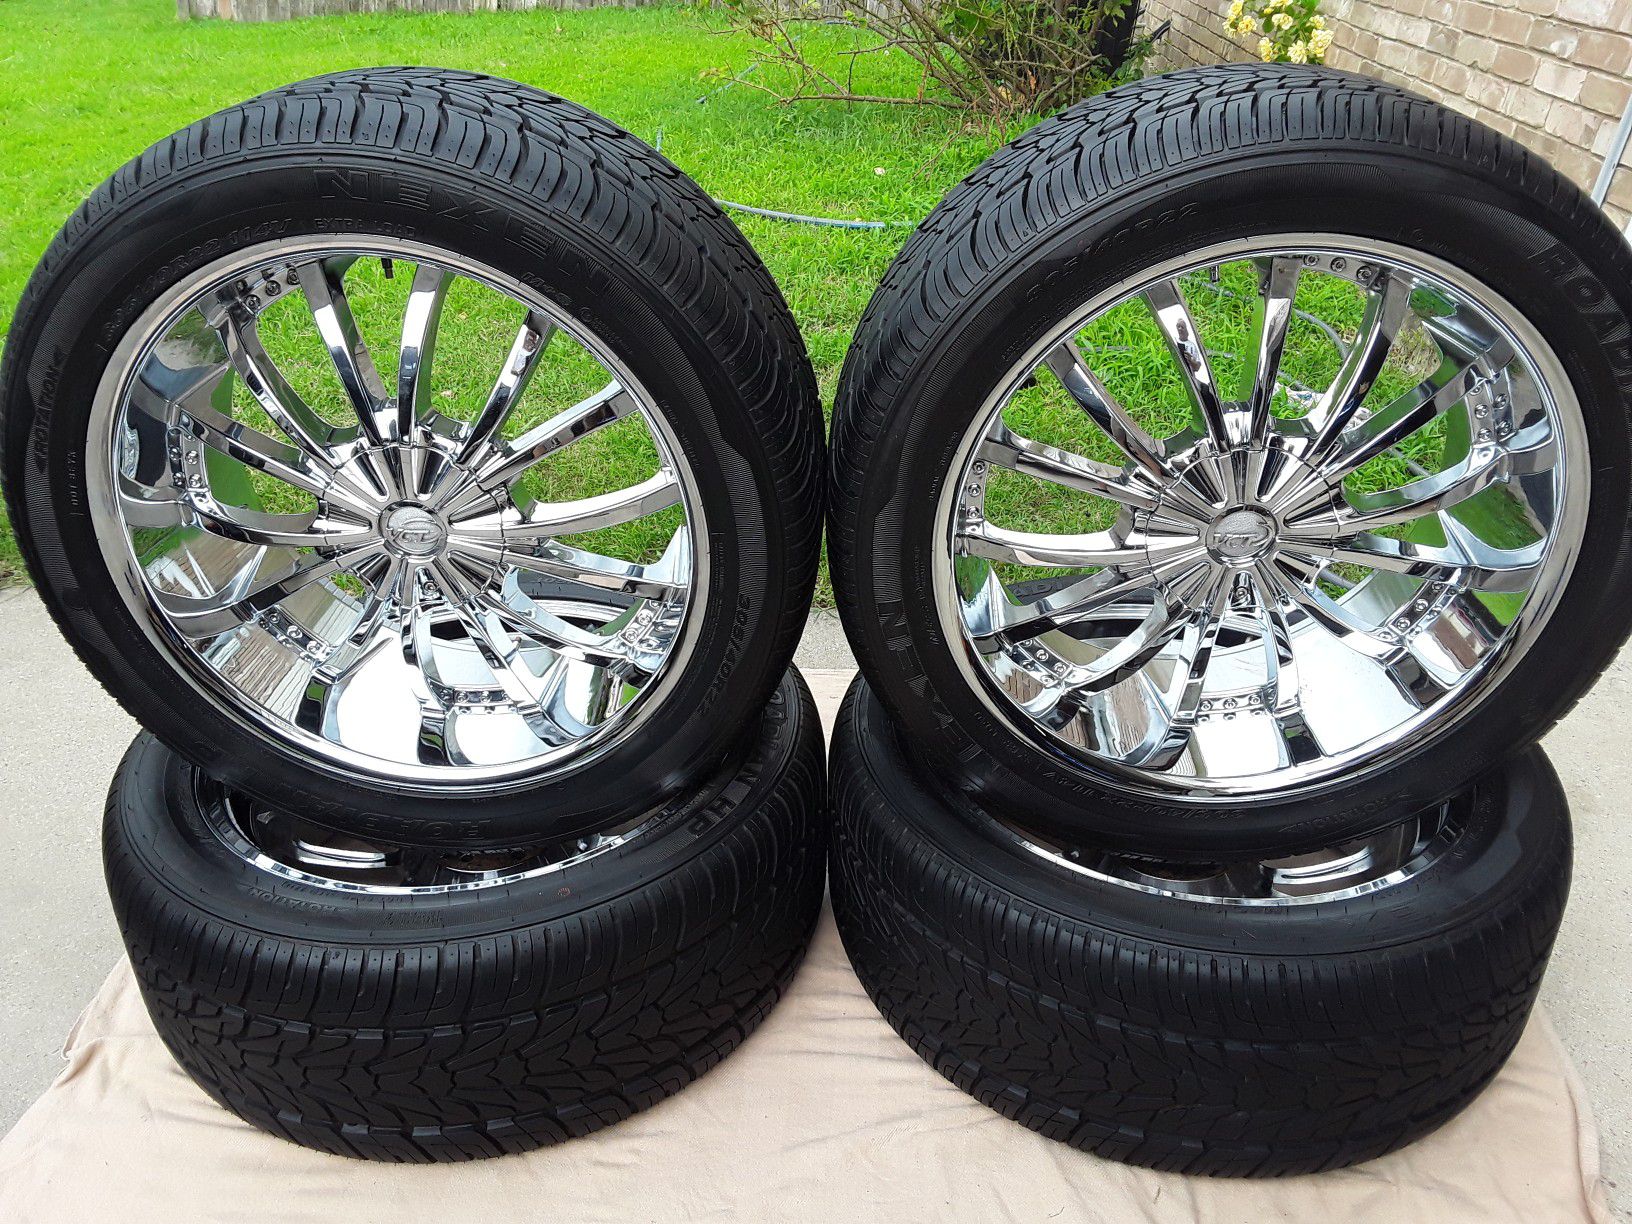 22 inch universal 5 lug chrome alloy wheels and tires "Like NEW!"